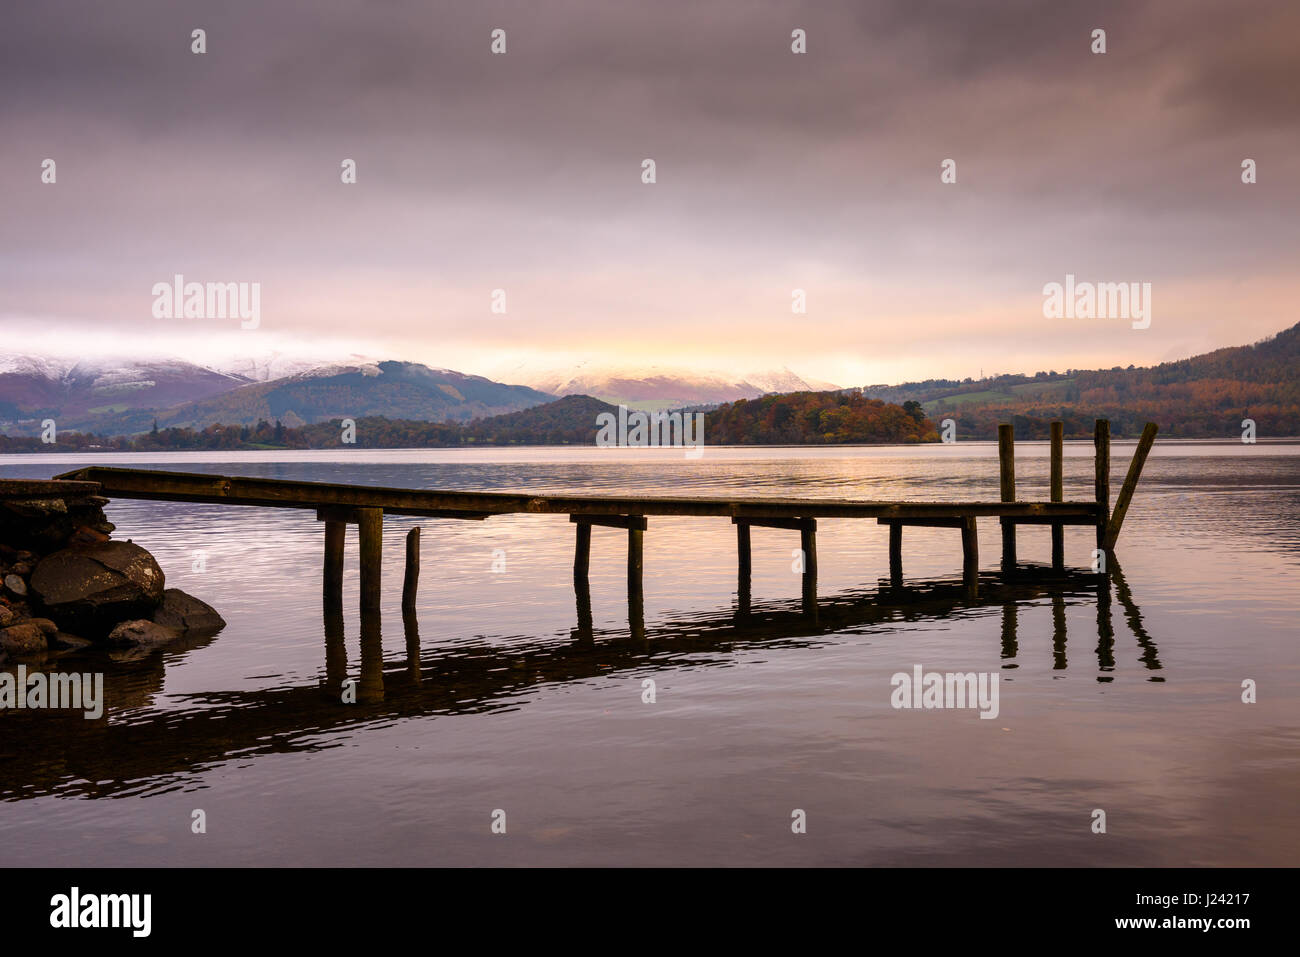 Jetty at Victoria Bay on Derwent Water in the Lake District National Park, Cumbria, England. Stock Photo